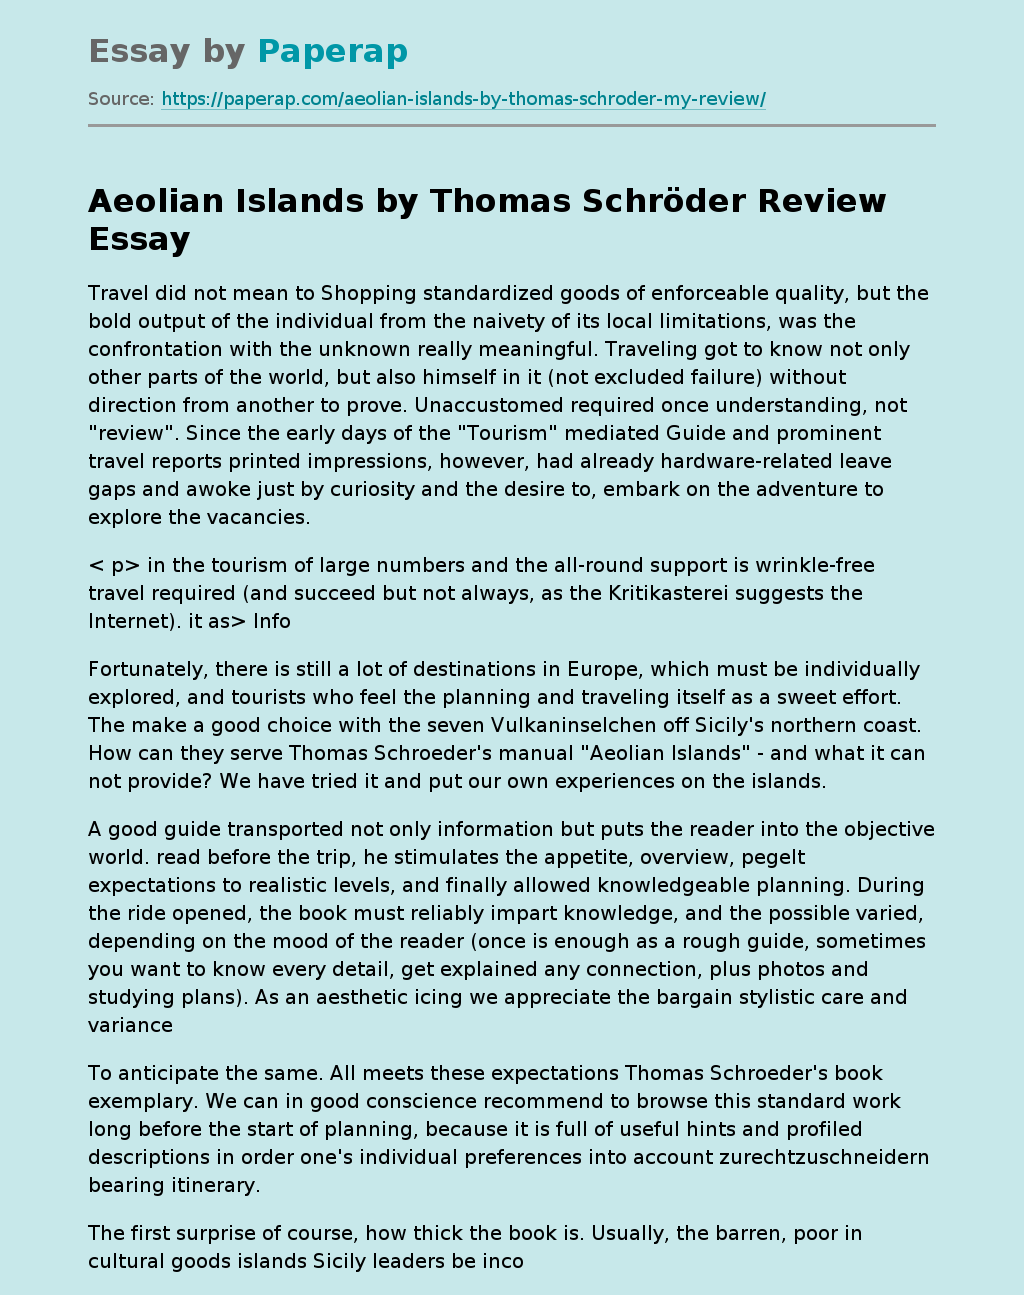 Aeolian Islands by Tom Schroder Review